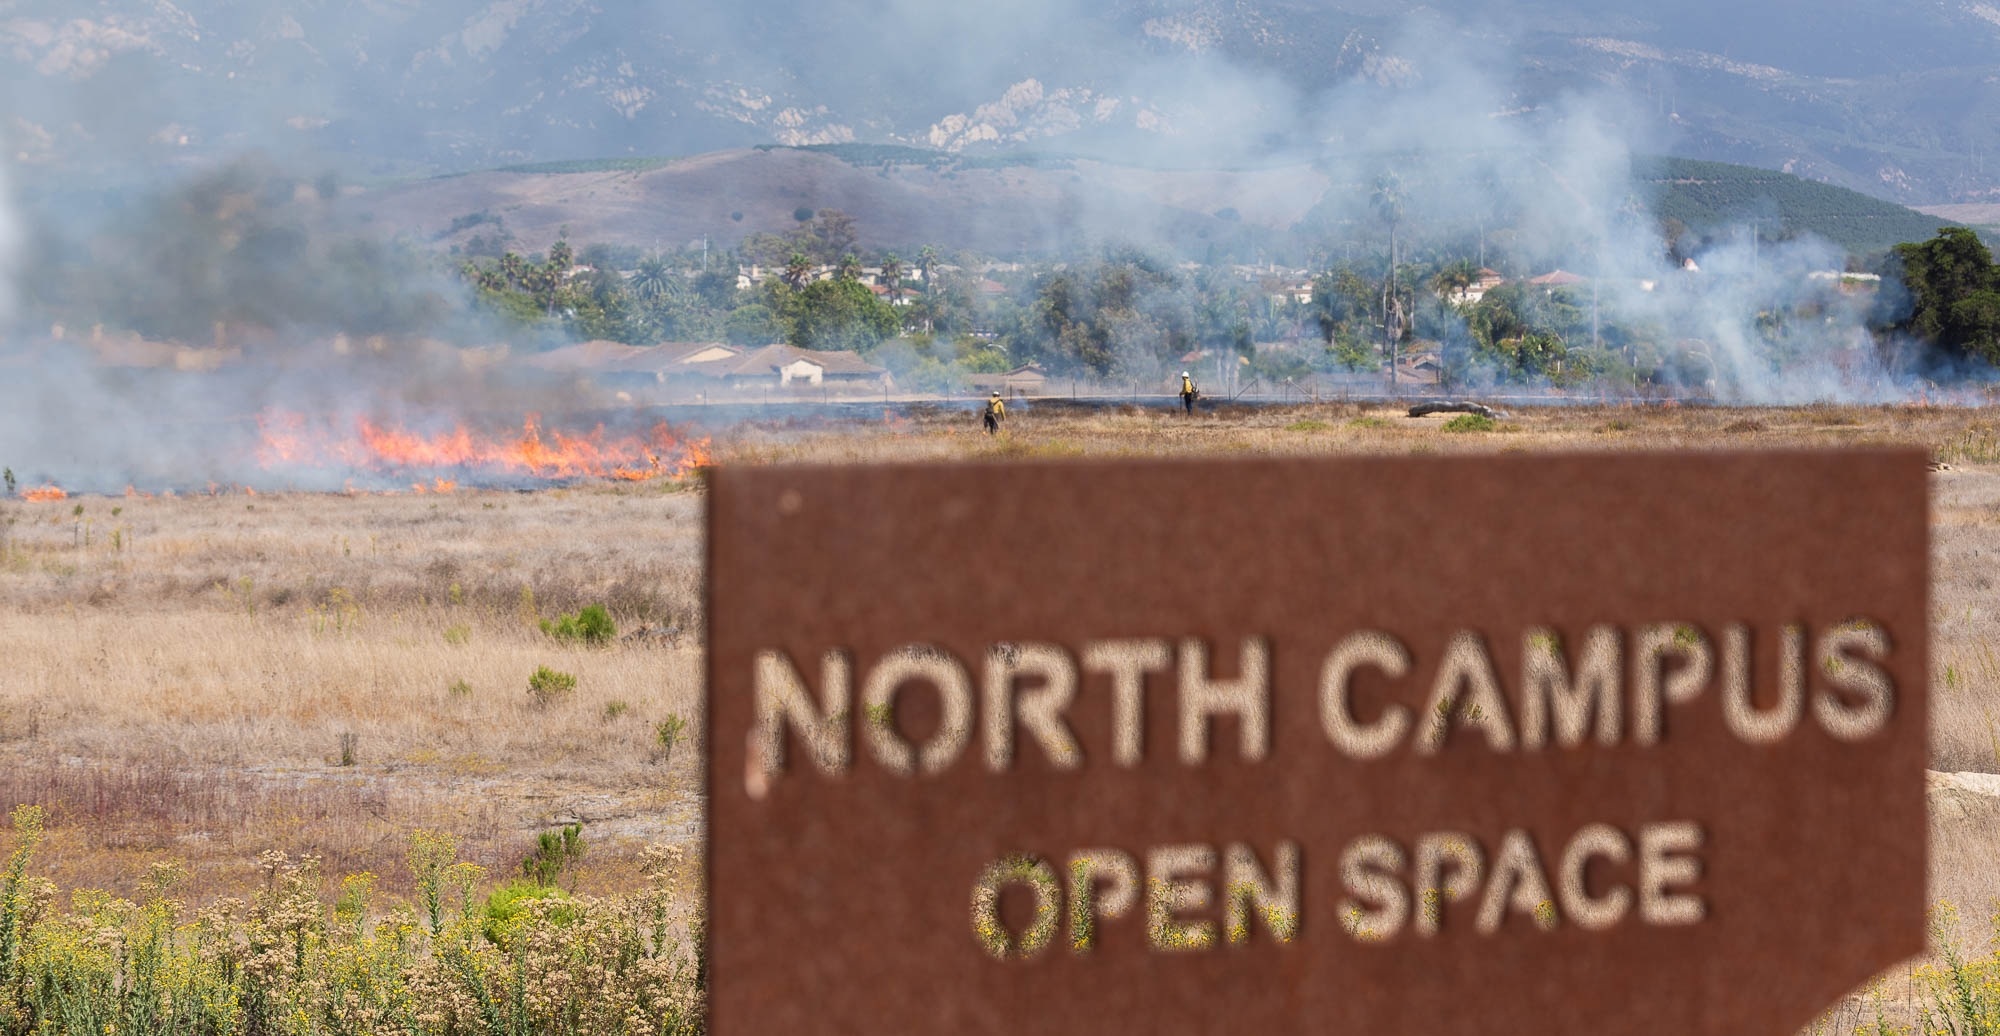 Flames burn behind a sign for the North Campus Open Space while firefighters manage the burn in the background.